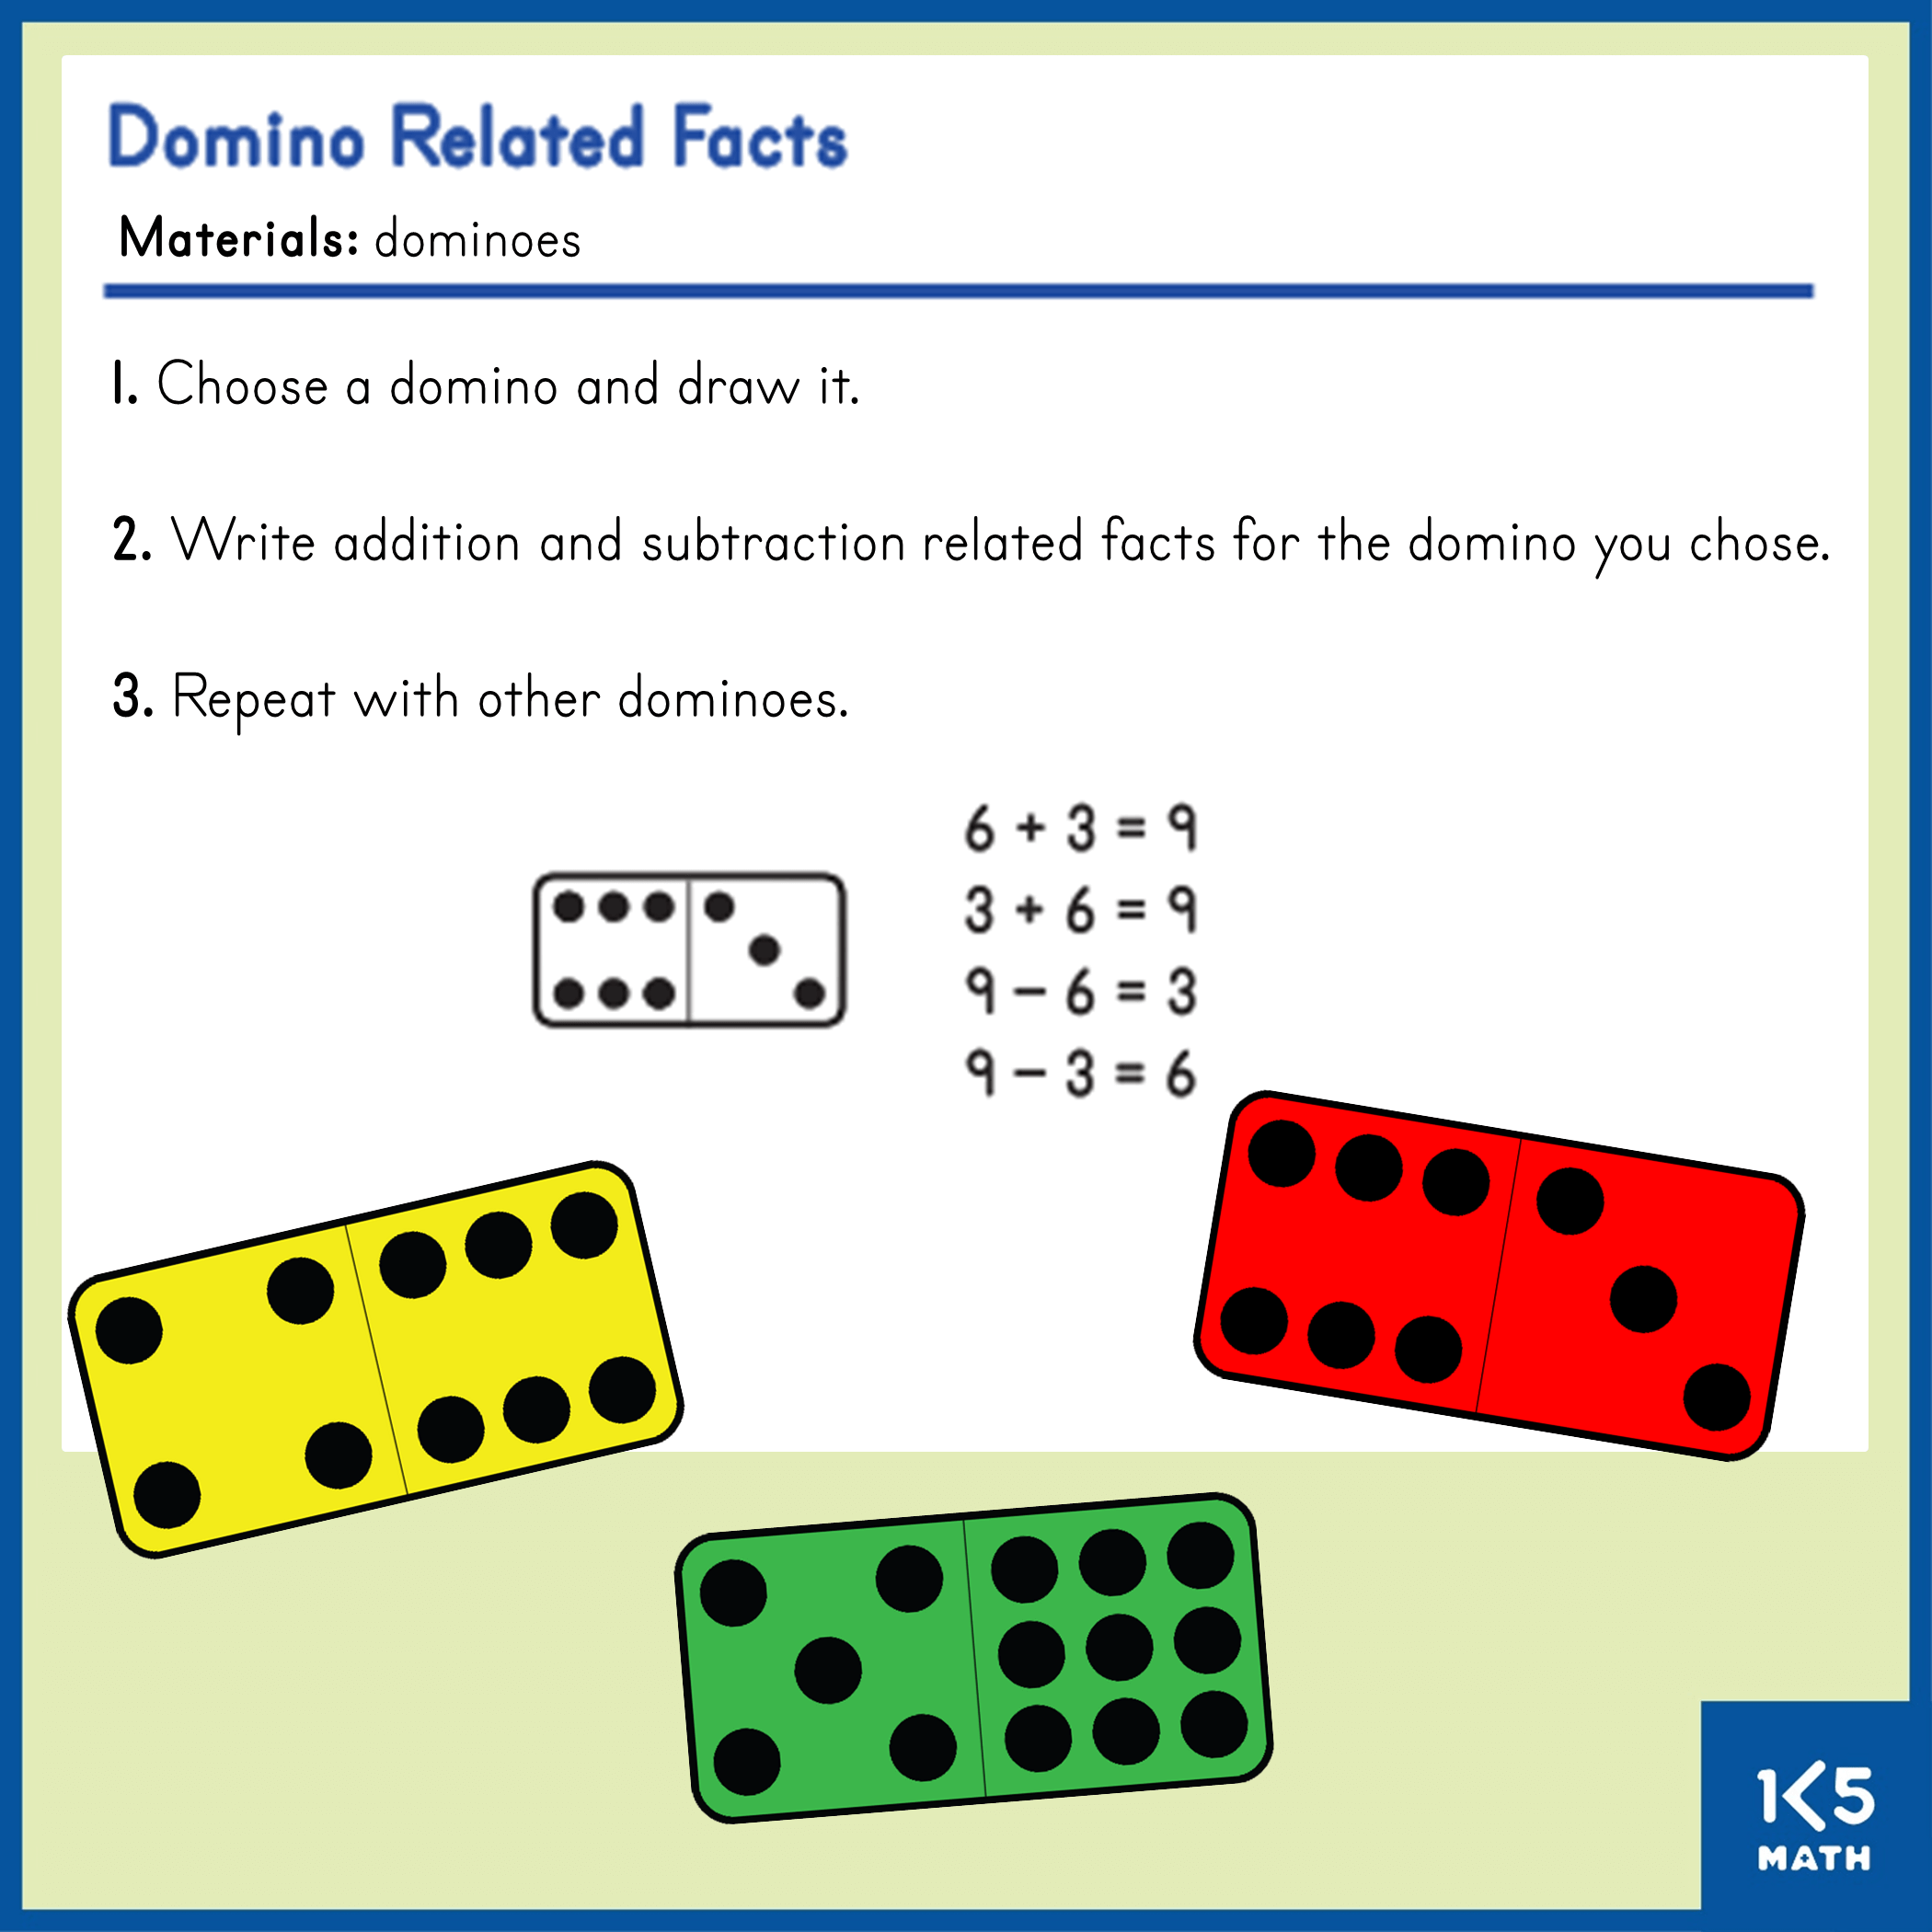 Domino Related Facts